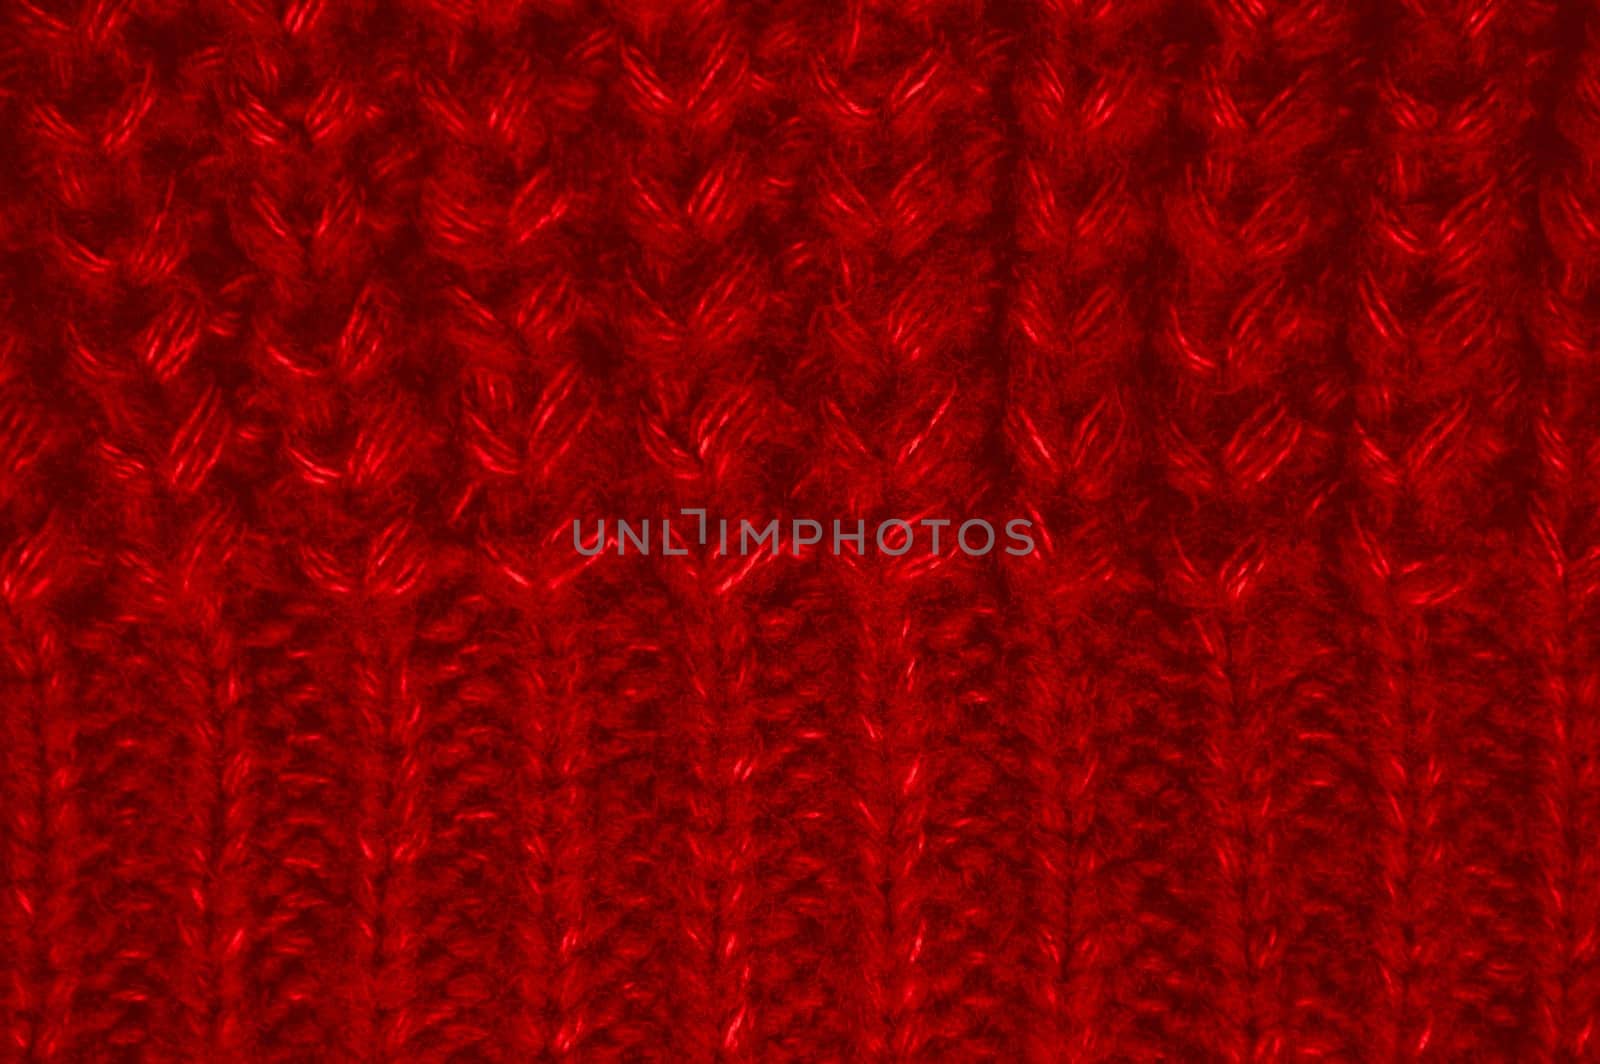 Detail Abstract Wool. Organic Woven Pullover. Cotton Handmade Xmas Background. Structure Knitted Fabric. Red Fiber Thread. Nordic Christmas Blanket. Soft Canvas Wallpaper. Knitted Wool.